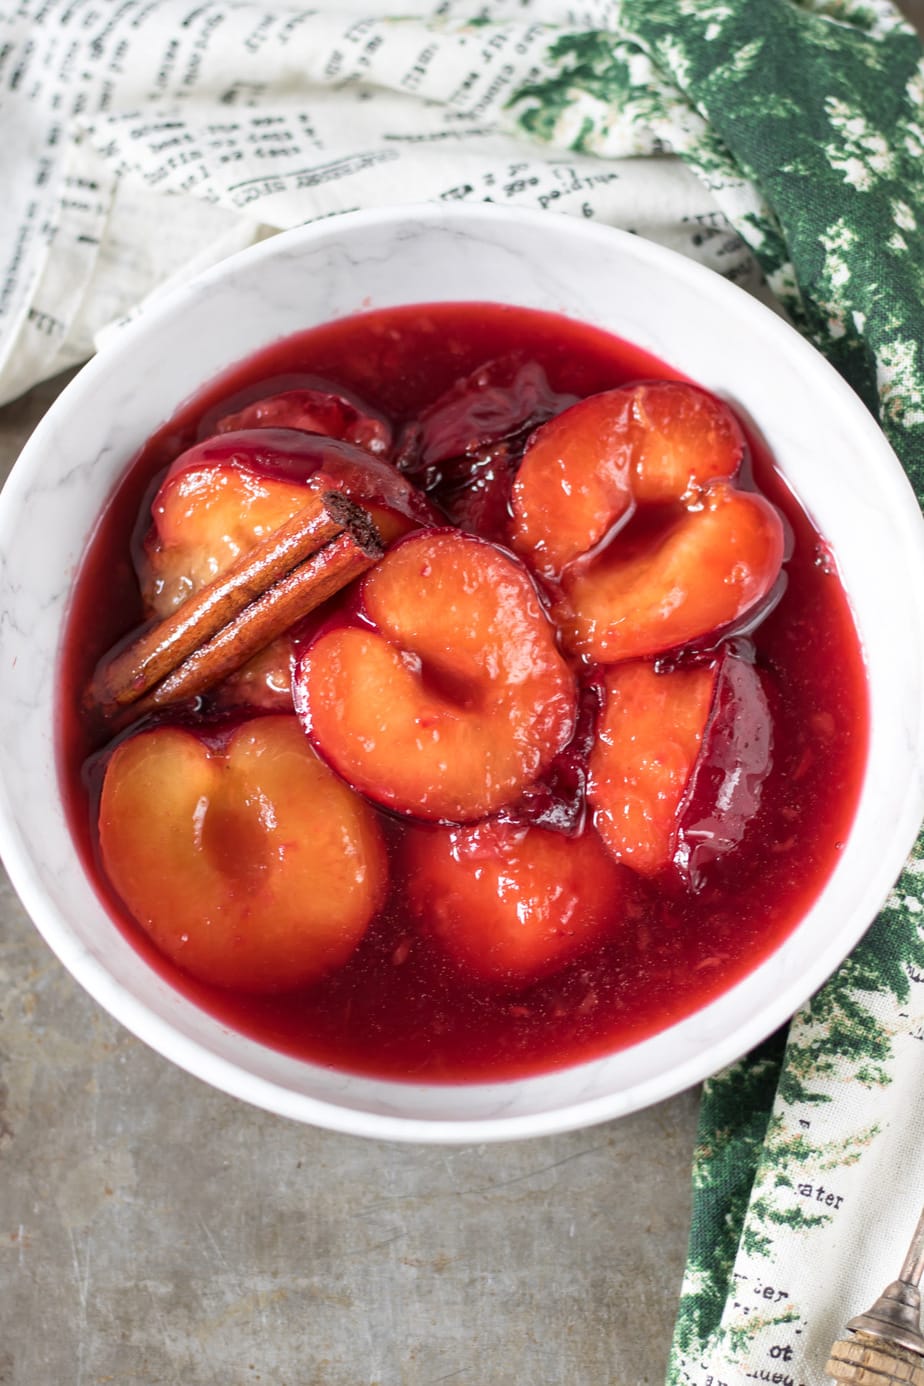 Bowl of cooked plums and a cinnamon stick.